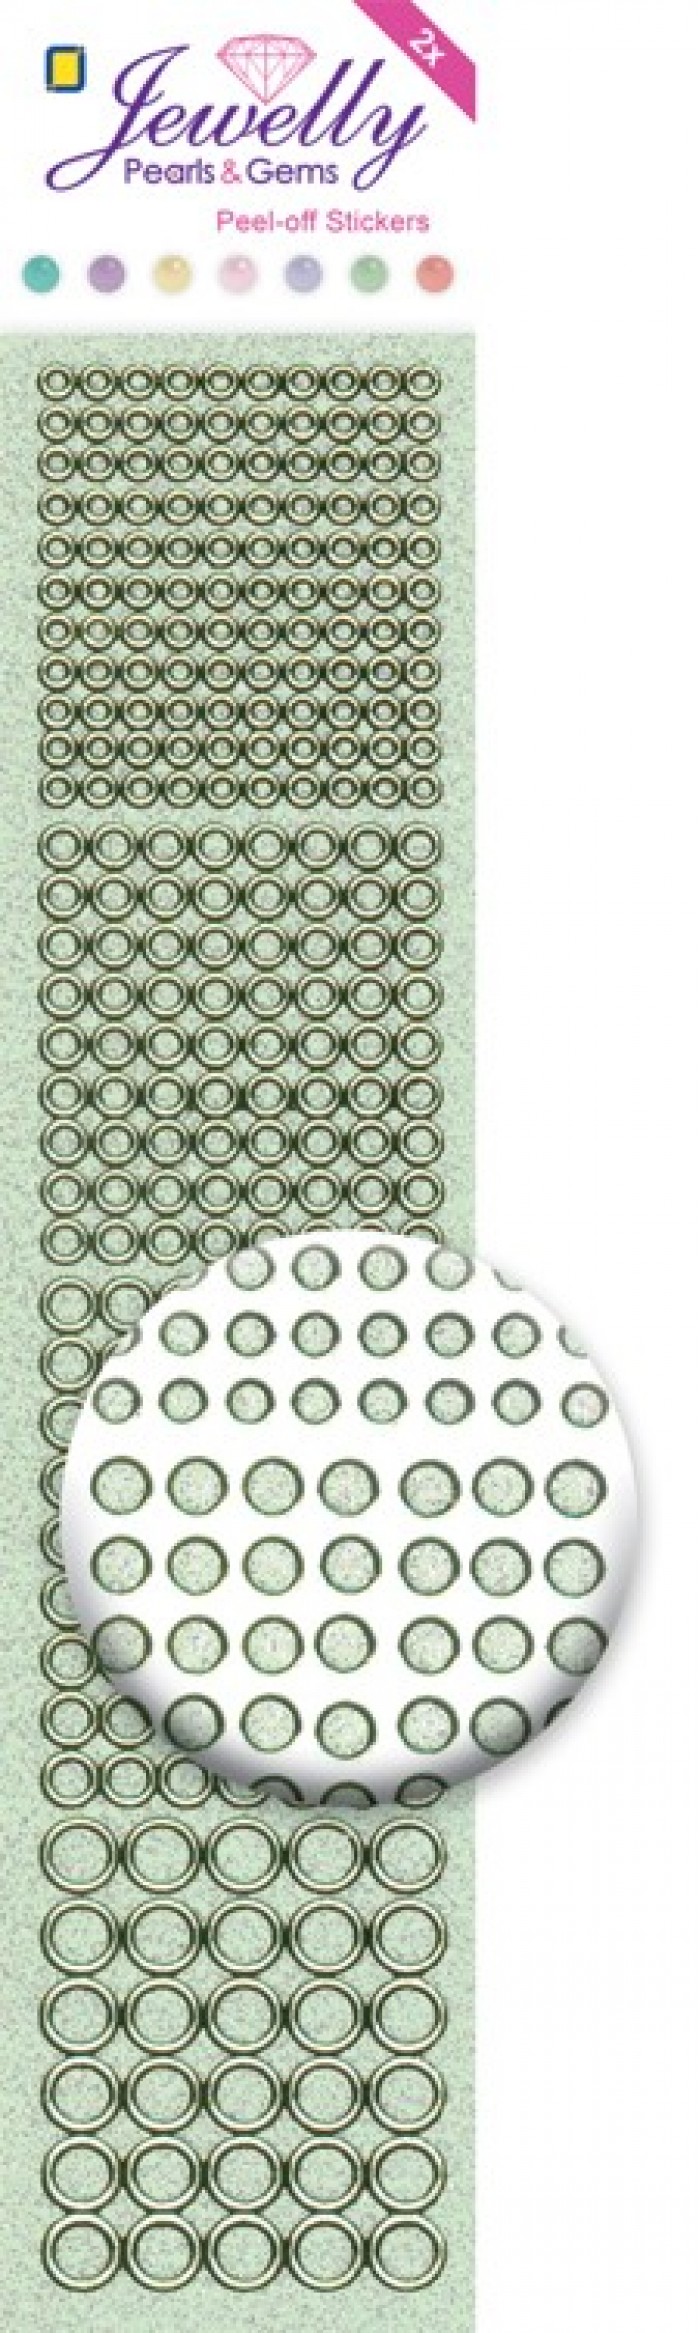 Jewelly Pearls & Gems Dots GT Green, 2 sheets